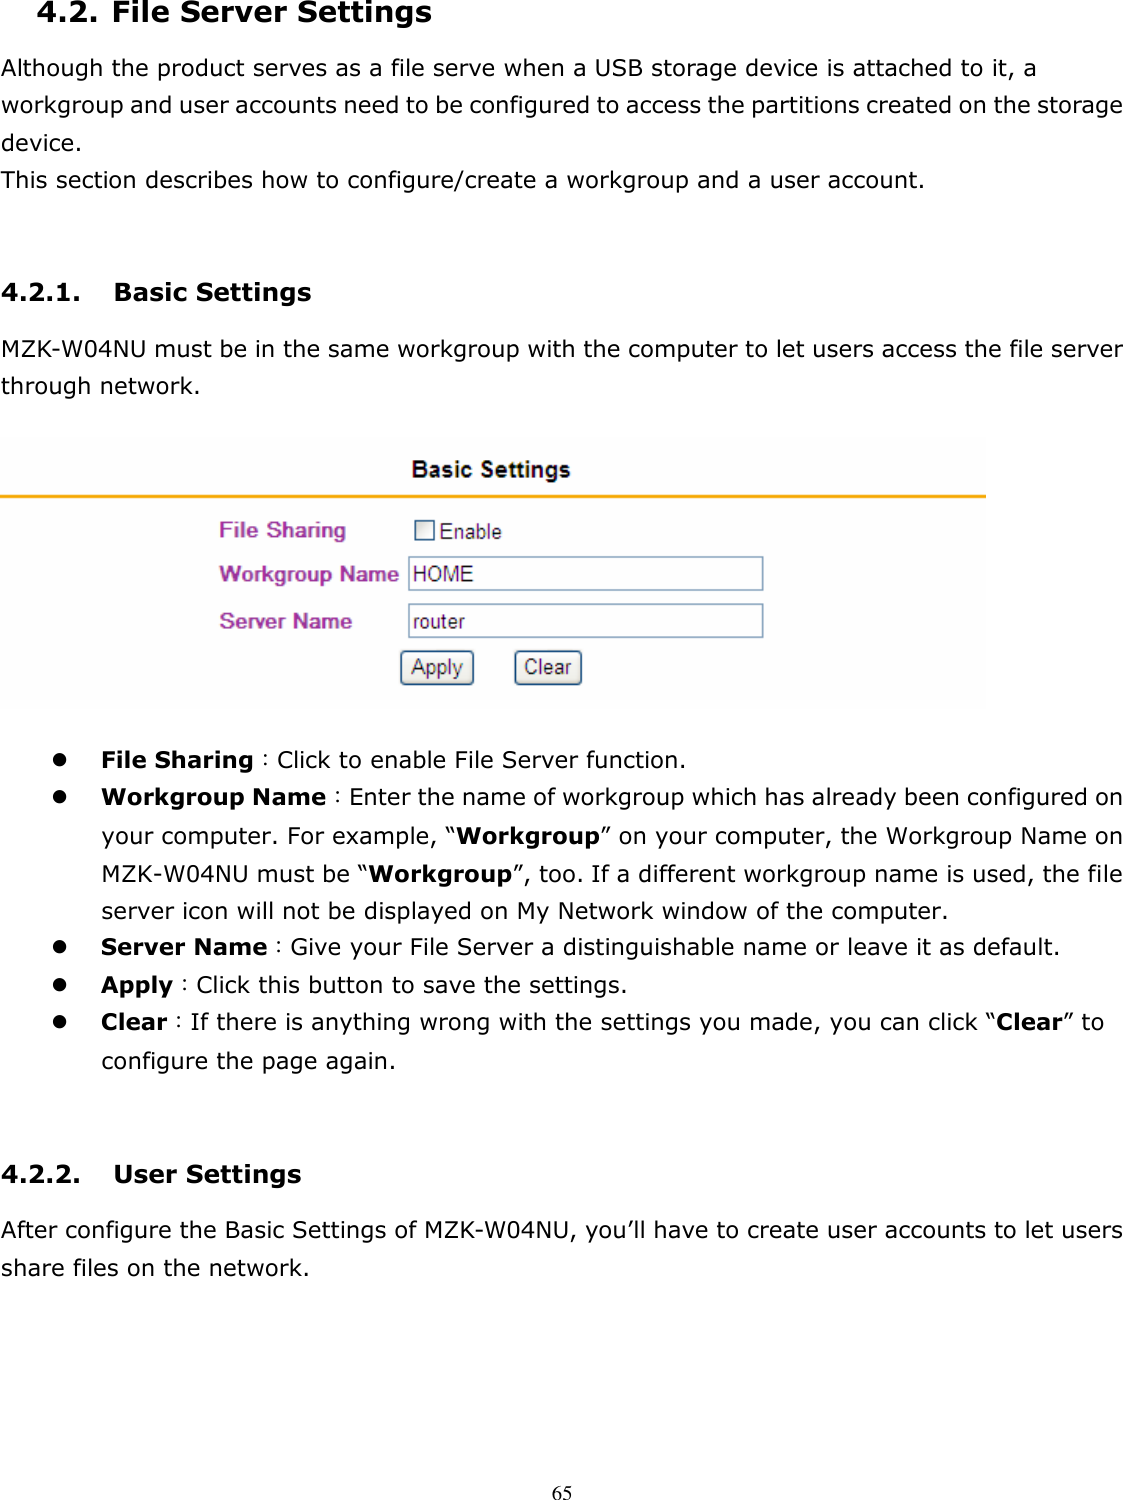   654.2. File Server Settings Although the product serves as a file serve when a USB storage device is attached to it, a workgroup and user accounts need to be configured to access the partitions created on the storage device.   This section describes how to configure/create a workgroup and a user account.  4.2.1. Basic Settings MZK-W04NU must be in the same workgroup with the computer to let users access the file server through network.     File Sharing：Click to enable File Server function.    Workgroup Name：Enter the name of workgroup which has already been configured on your computer. For example, “Workgroup” on your computer, the Workgroup Name on MZK-W04NU must be “Workgroup”, too. If a different workgroup name is used, the file server icon will not be displayed on My Network window of the computer.  Server Name：Give your File Server a distinguishable name or leave it as default.      Apply：Click this button to save the settings.  Clear：If there is anything wrong with the settings you made, you can click “Clear” to configure the page again.  4.2.2. User Settings After configure the Basic Settings of MZK-W04NU, you’ll have to create user accounts to let users share files on the network. 